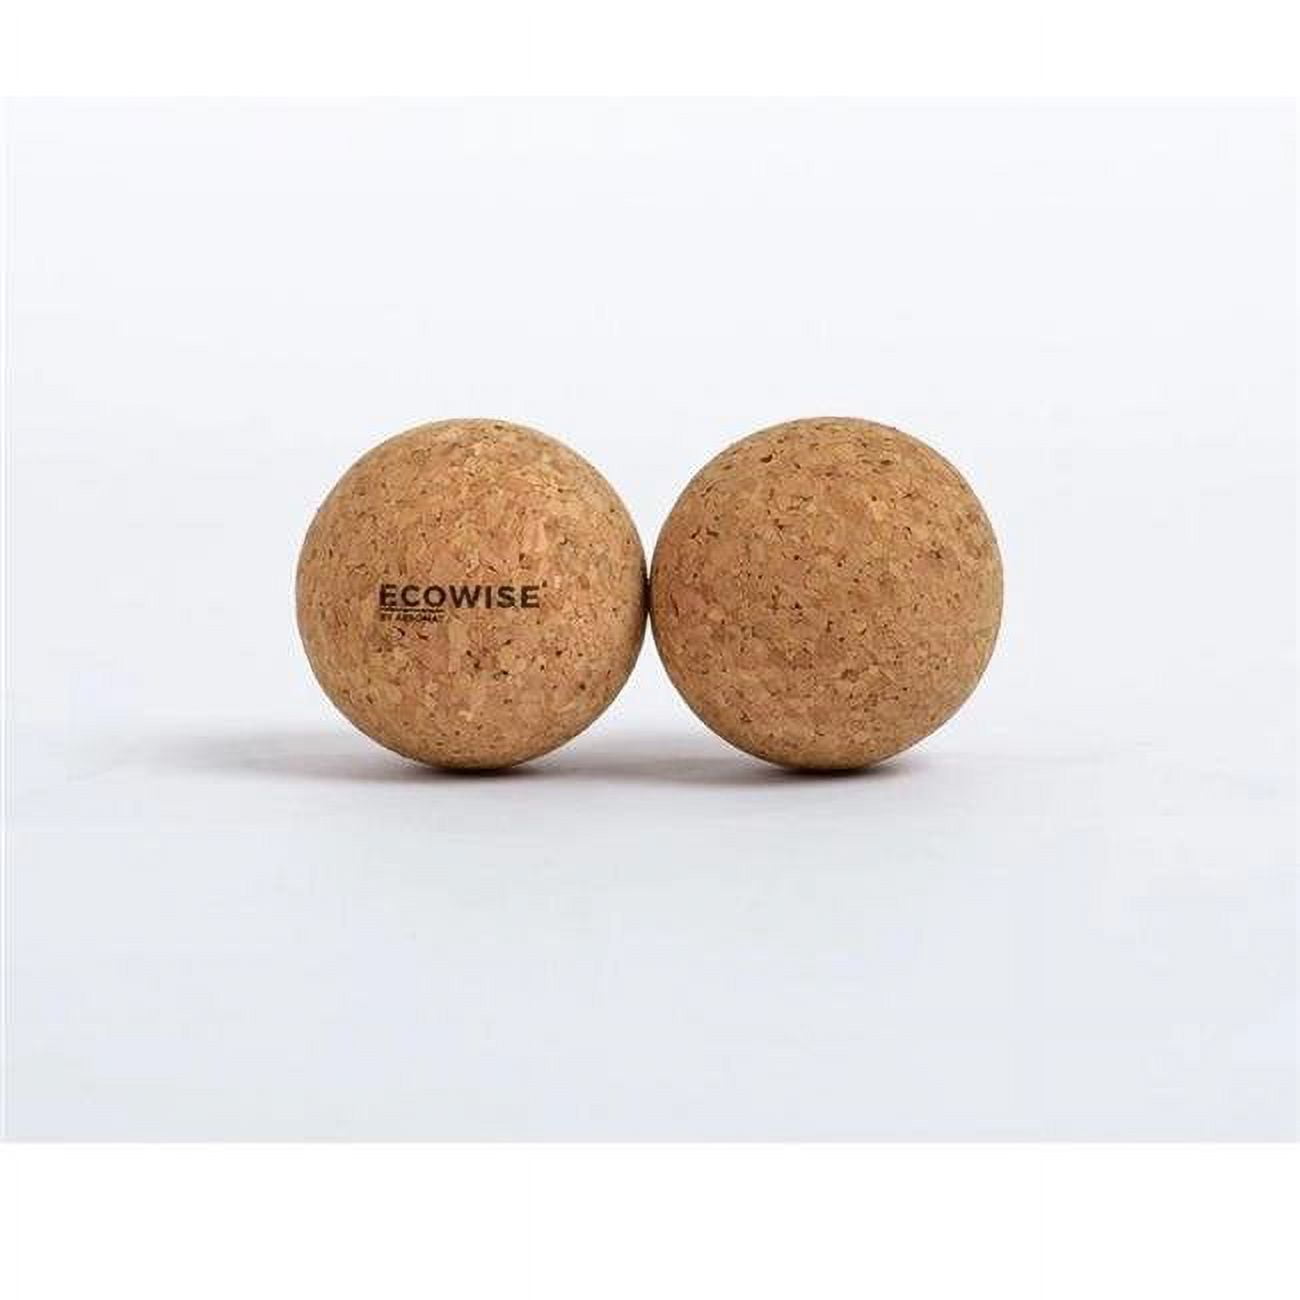 Picture of AGM Group 82131 Ecowise Fitness Cork Hard Exercises Ball, Set of 2